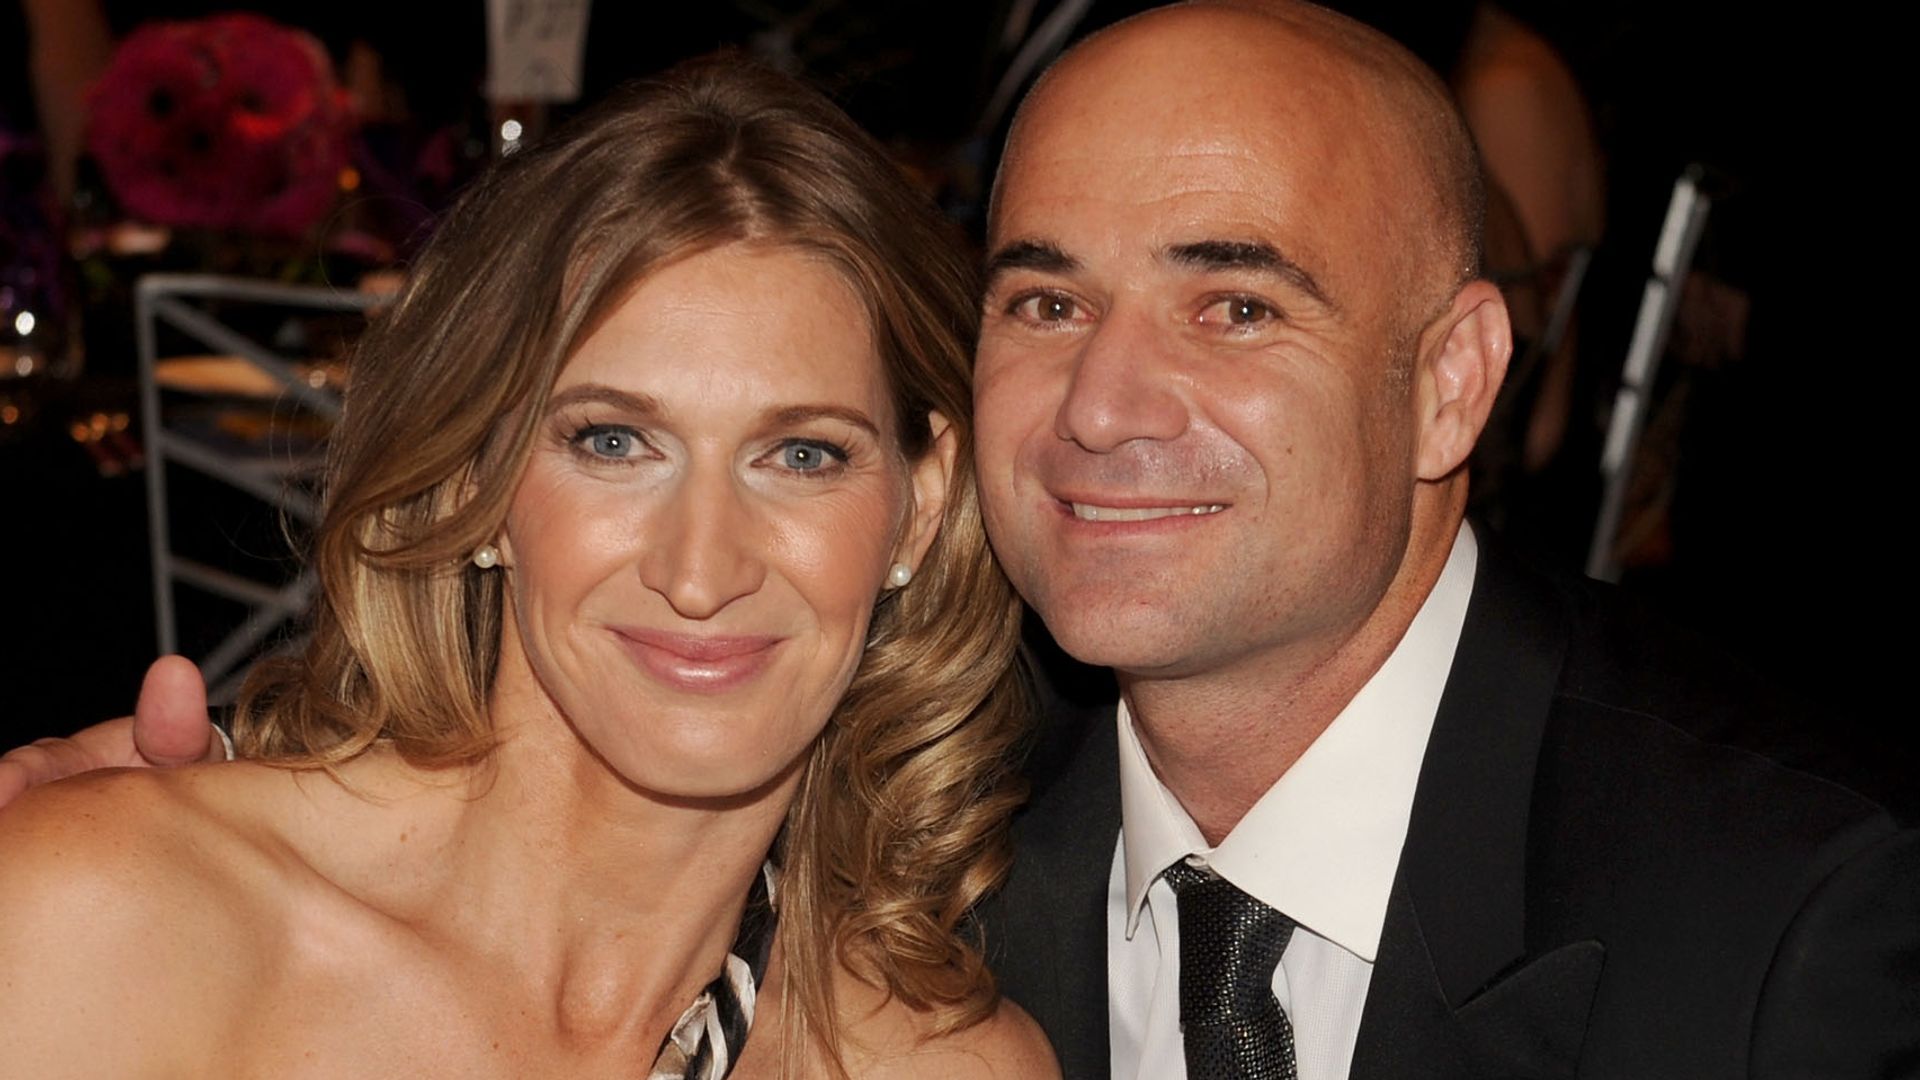 Andre Agassi in a suit and Stefanie in a one-shoulder dress at dinner